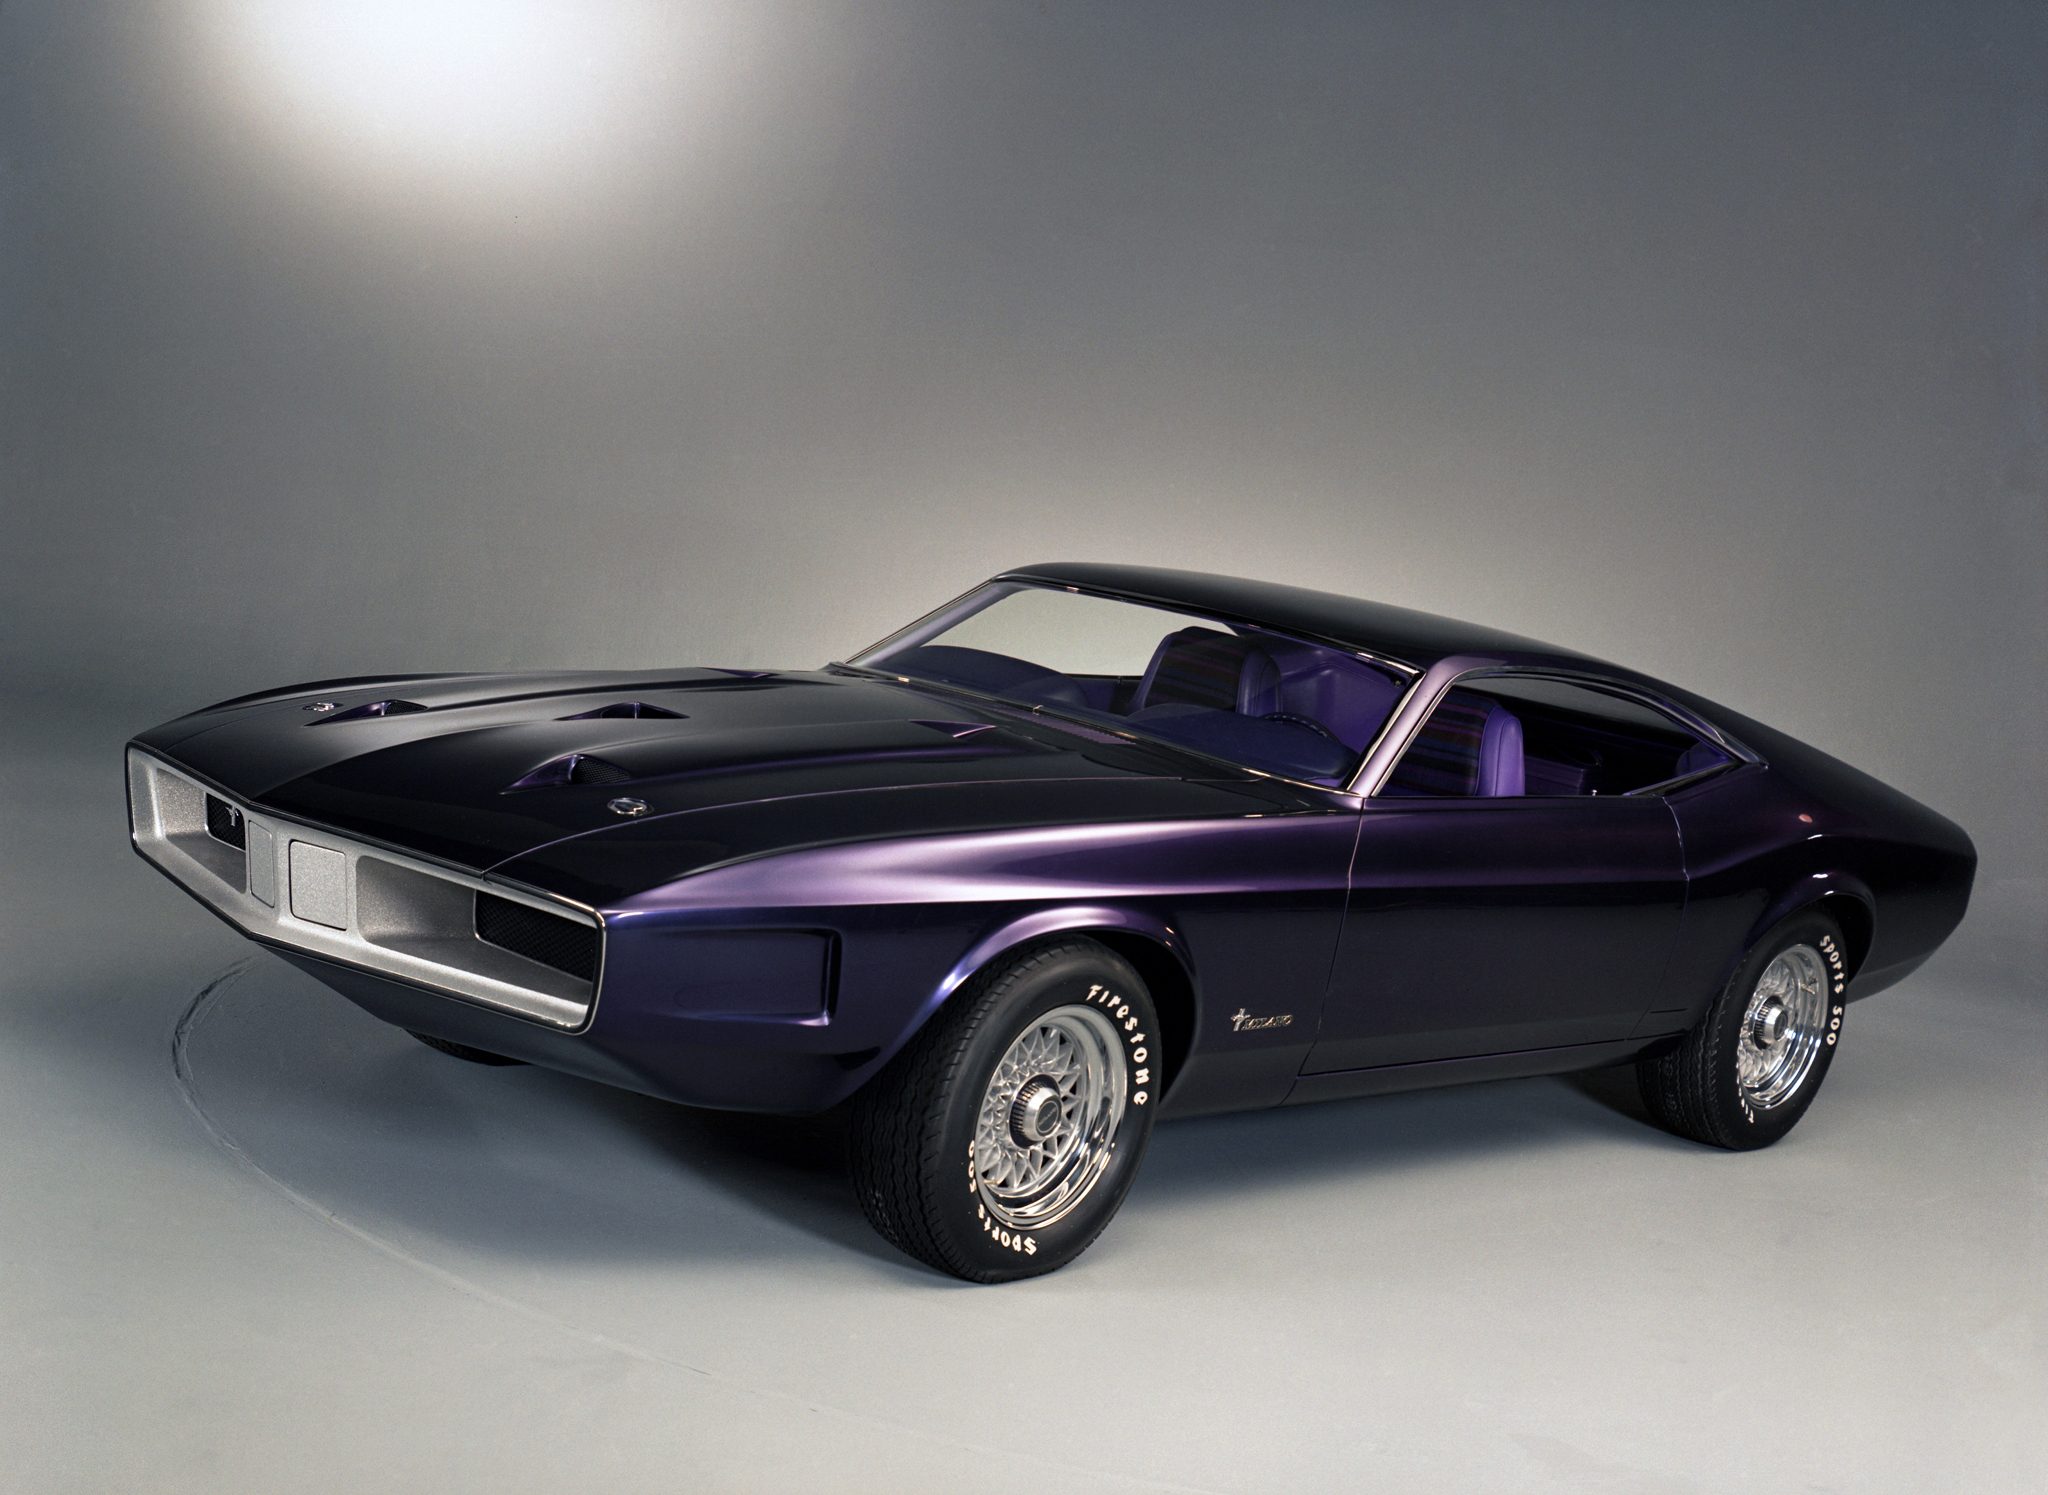 Mustang Of The Day: 1970 Ford Mustang Milano